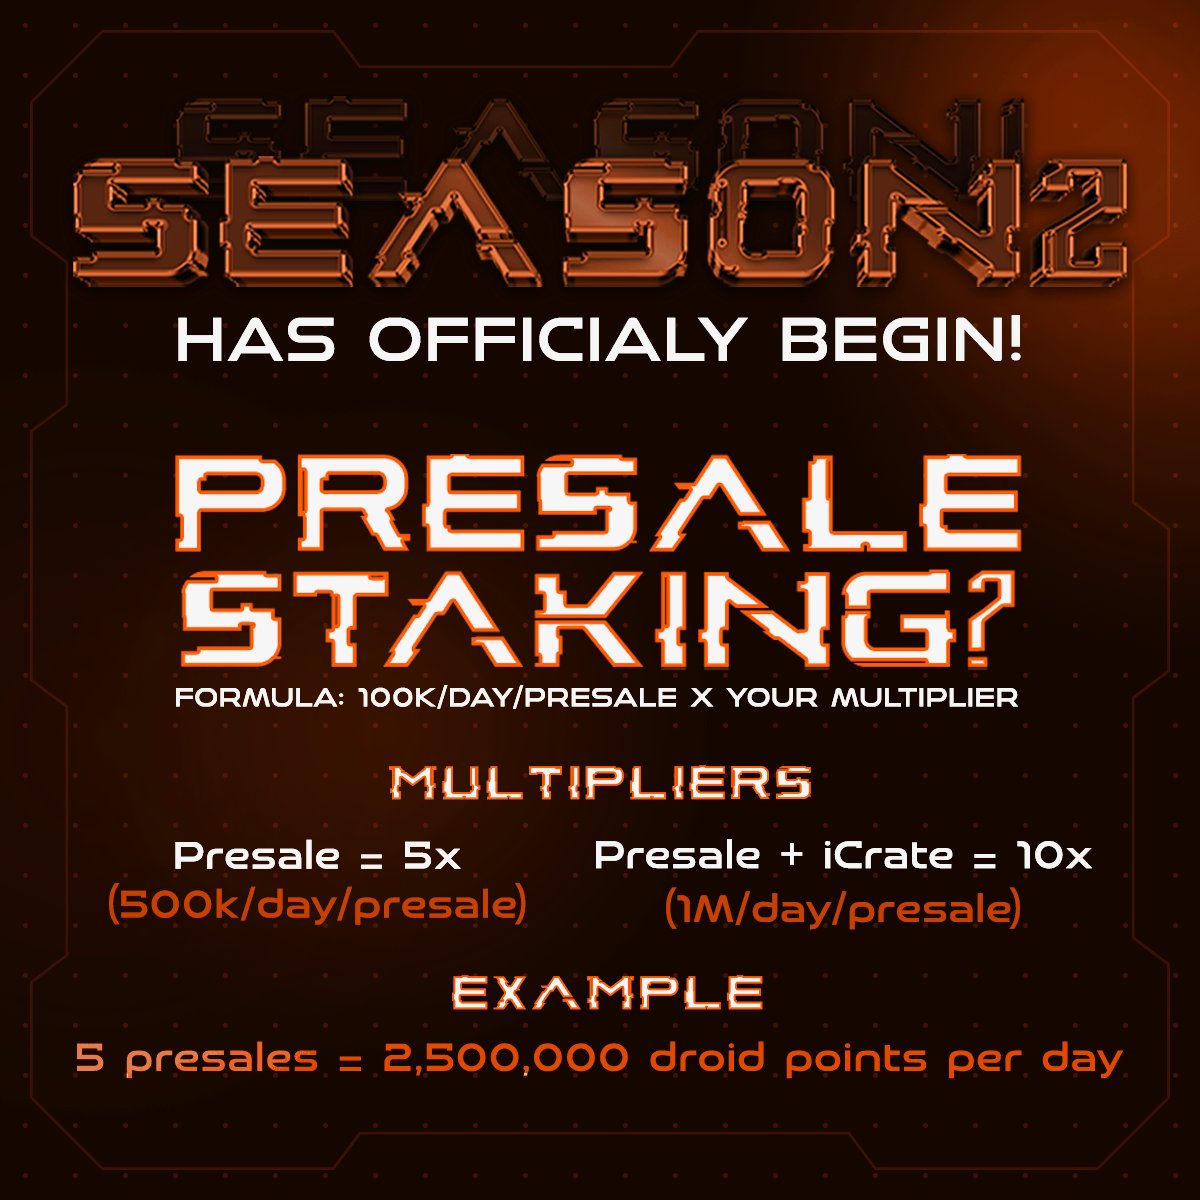 Points Farming Season 1 has now concluded!

$DROIDS Season 2 starts NOW!

Presale Staking live for more daily points💸